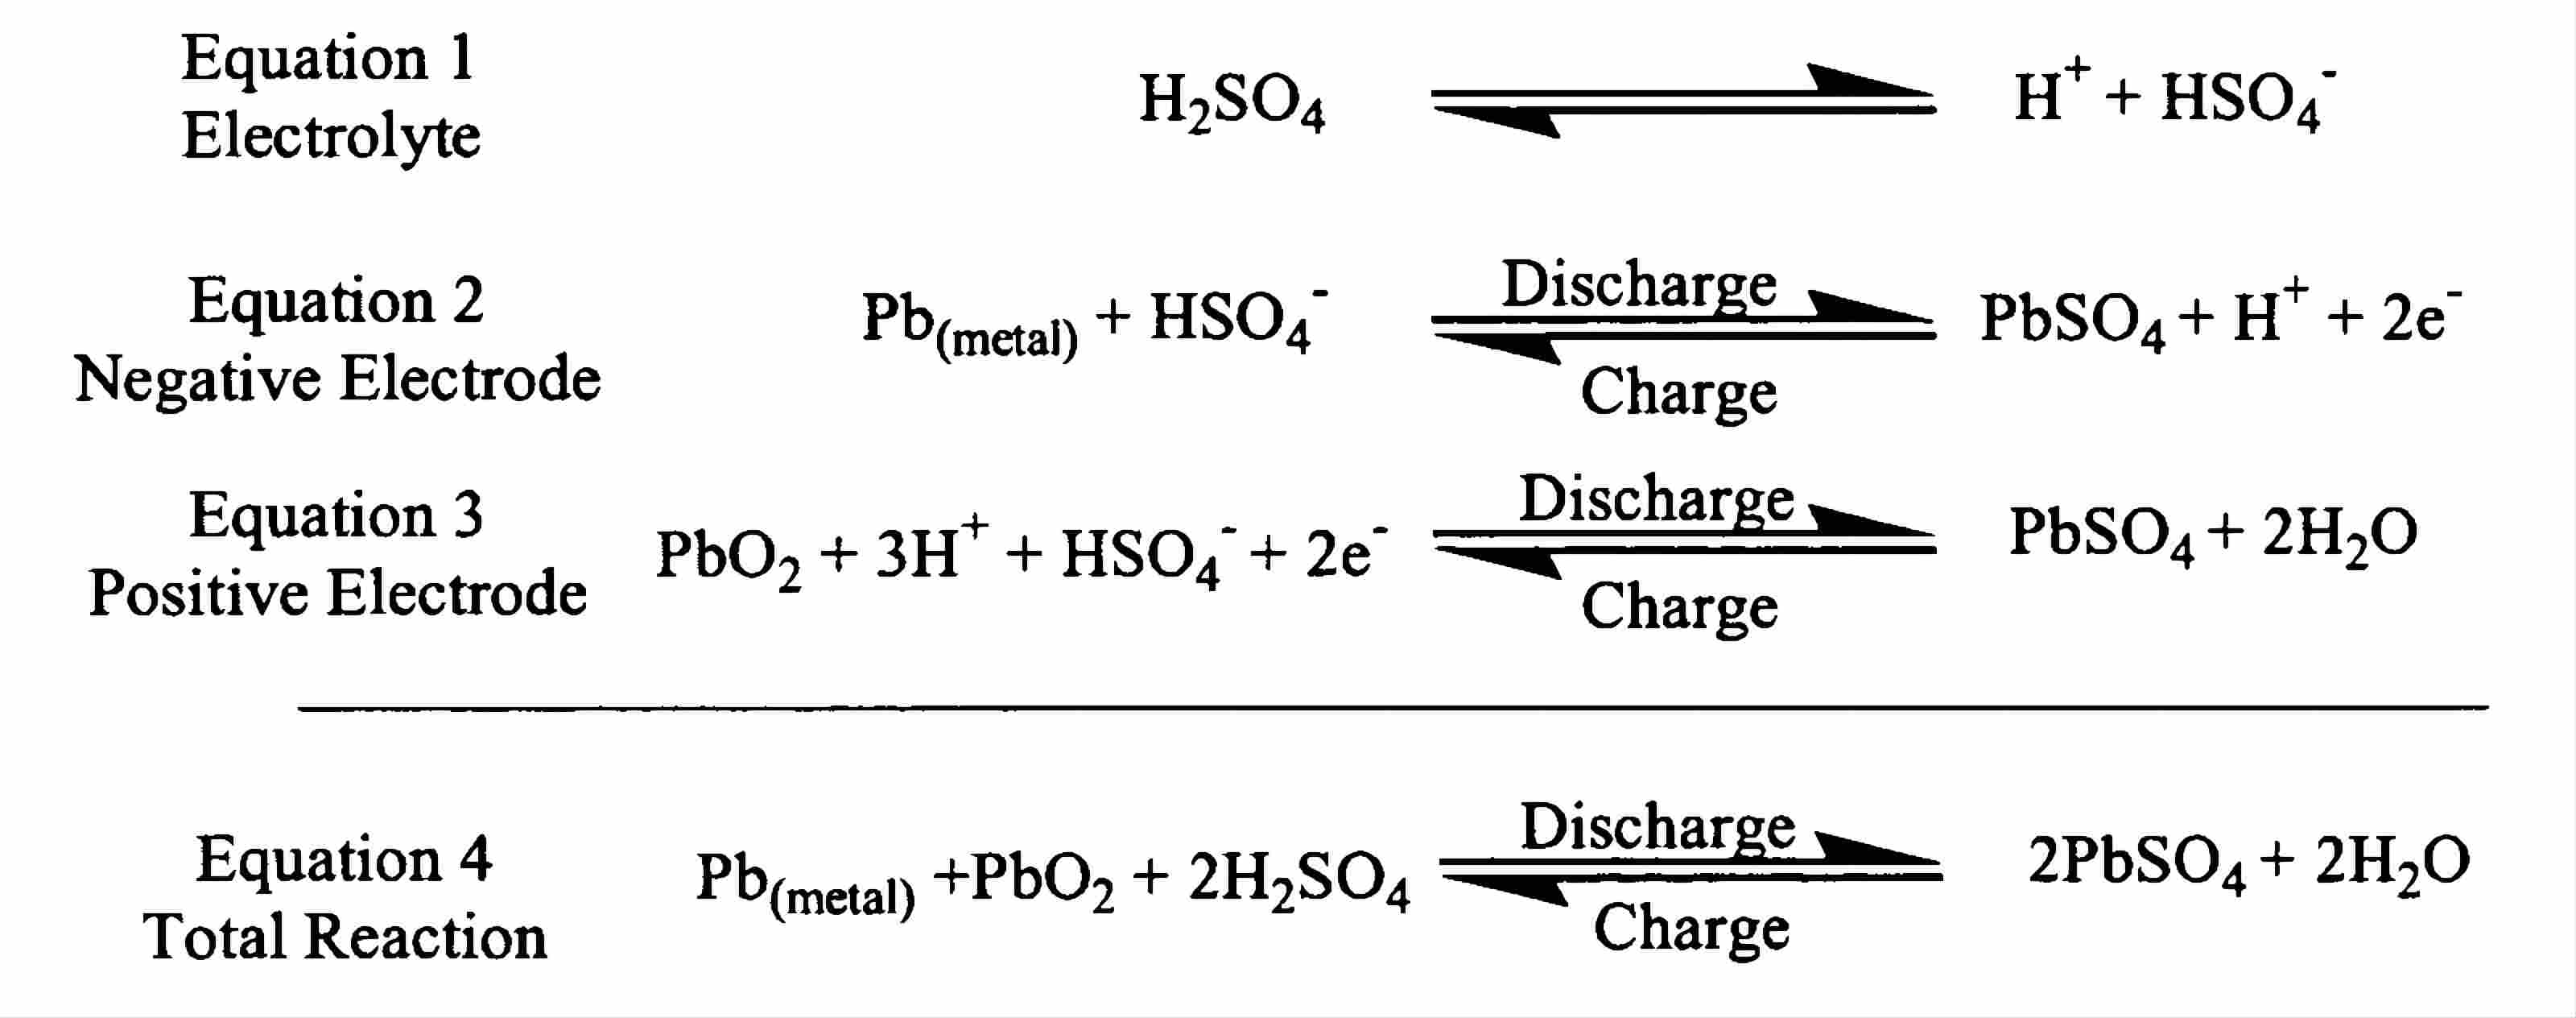 Chemical equation of lead-acid battery